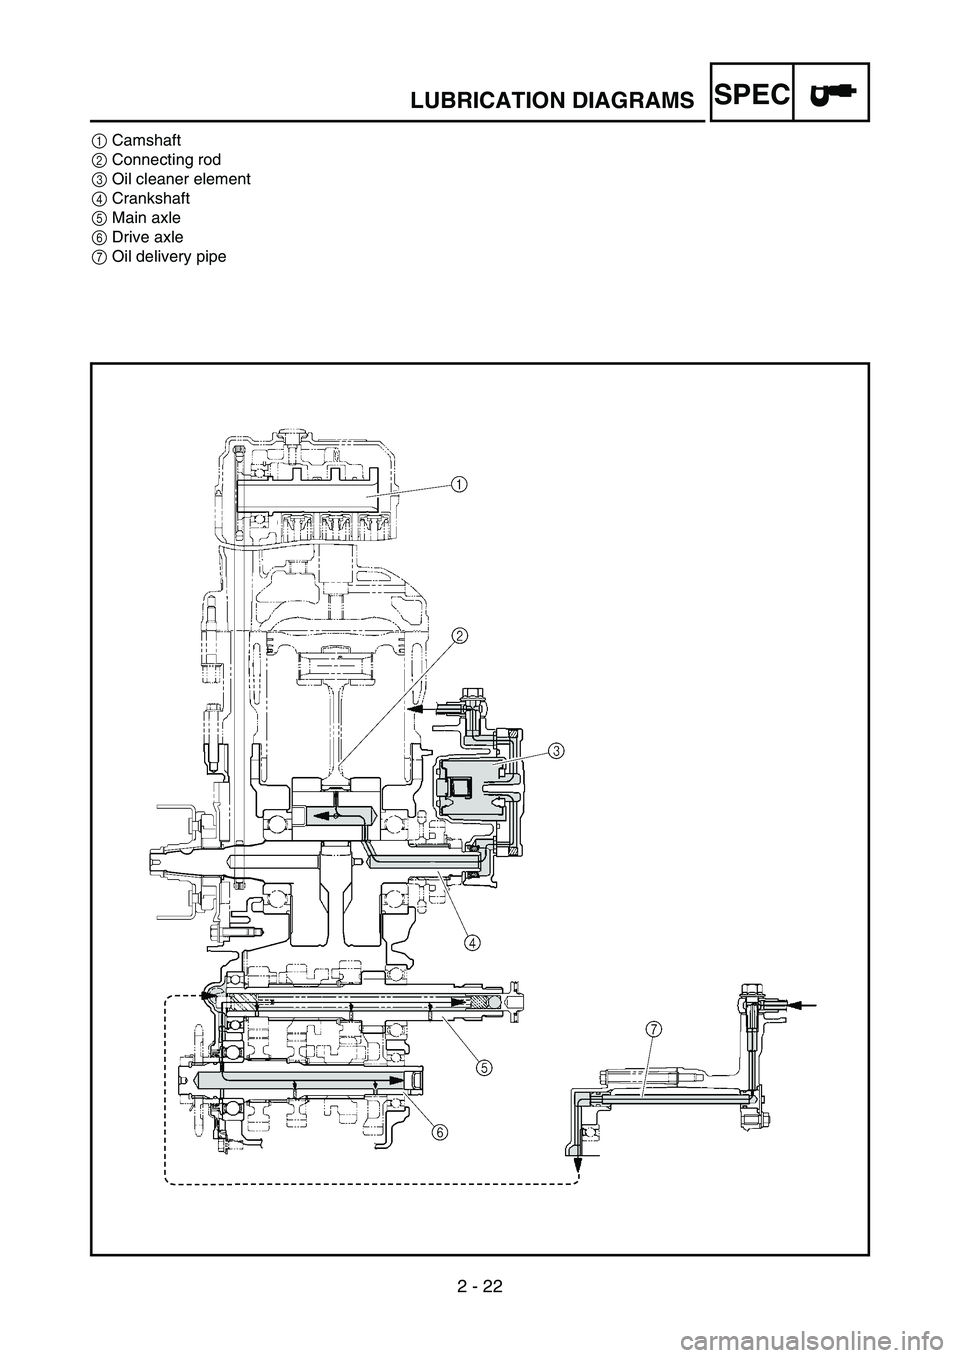 YAMAHA WR 450F 2005  Betriebsanleitungen (in German) 2 - 22
SPECLUBRICATION DIAGRAMS
1Camshaft
2Connecting rod
3Oil cleaner element
4Crankshaft
5Main axle
6Drive axle
7Oil delivery pipe 